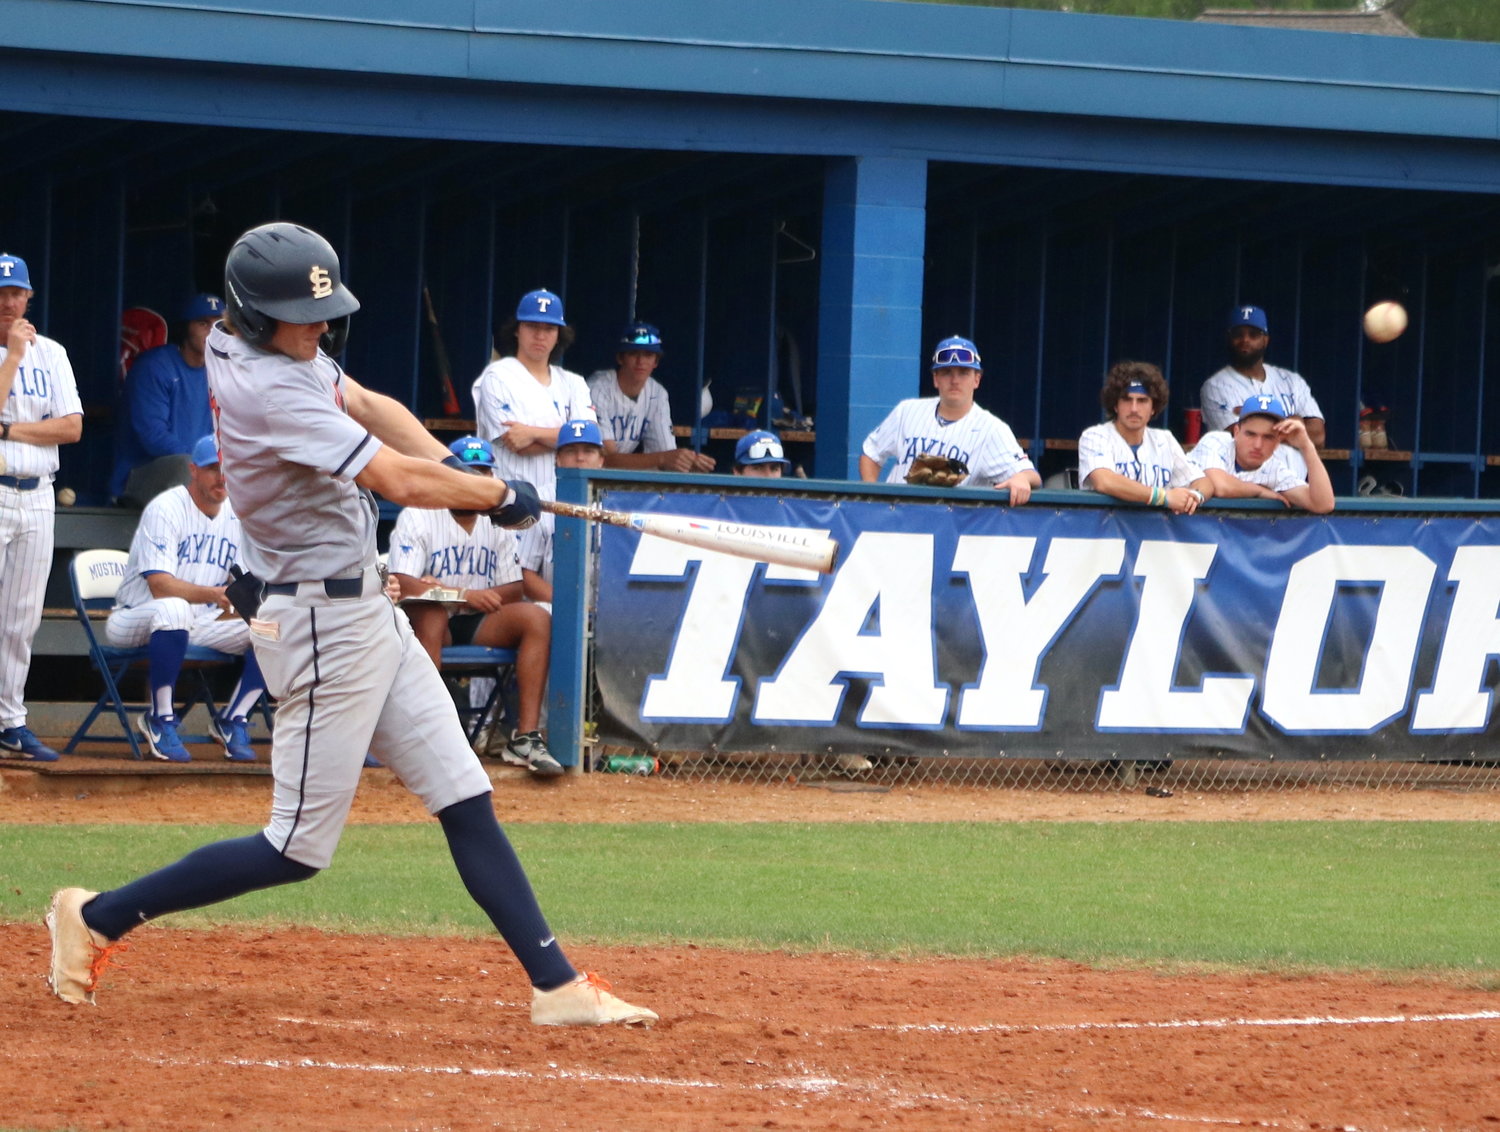 Taylor Tiedt hits during Thursday's game between Taylor and Seven Lakes at the Taylor baseball field.